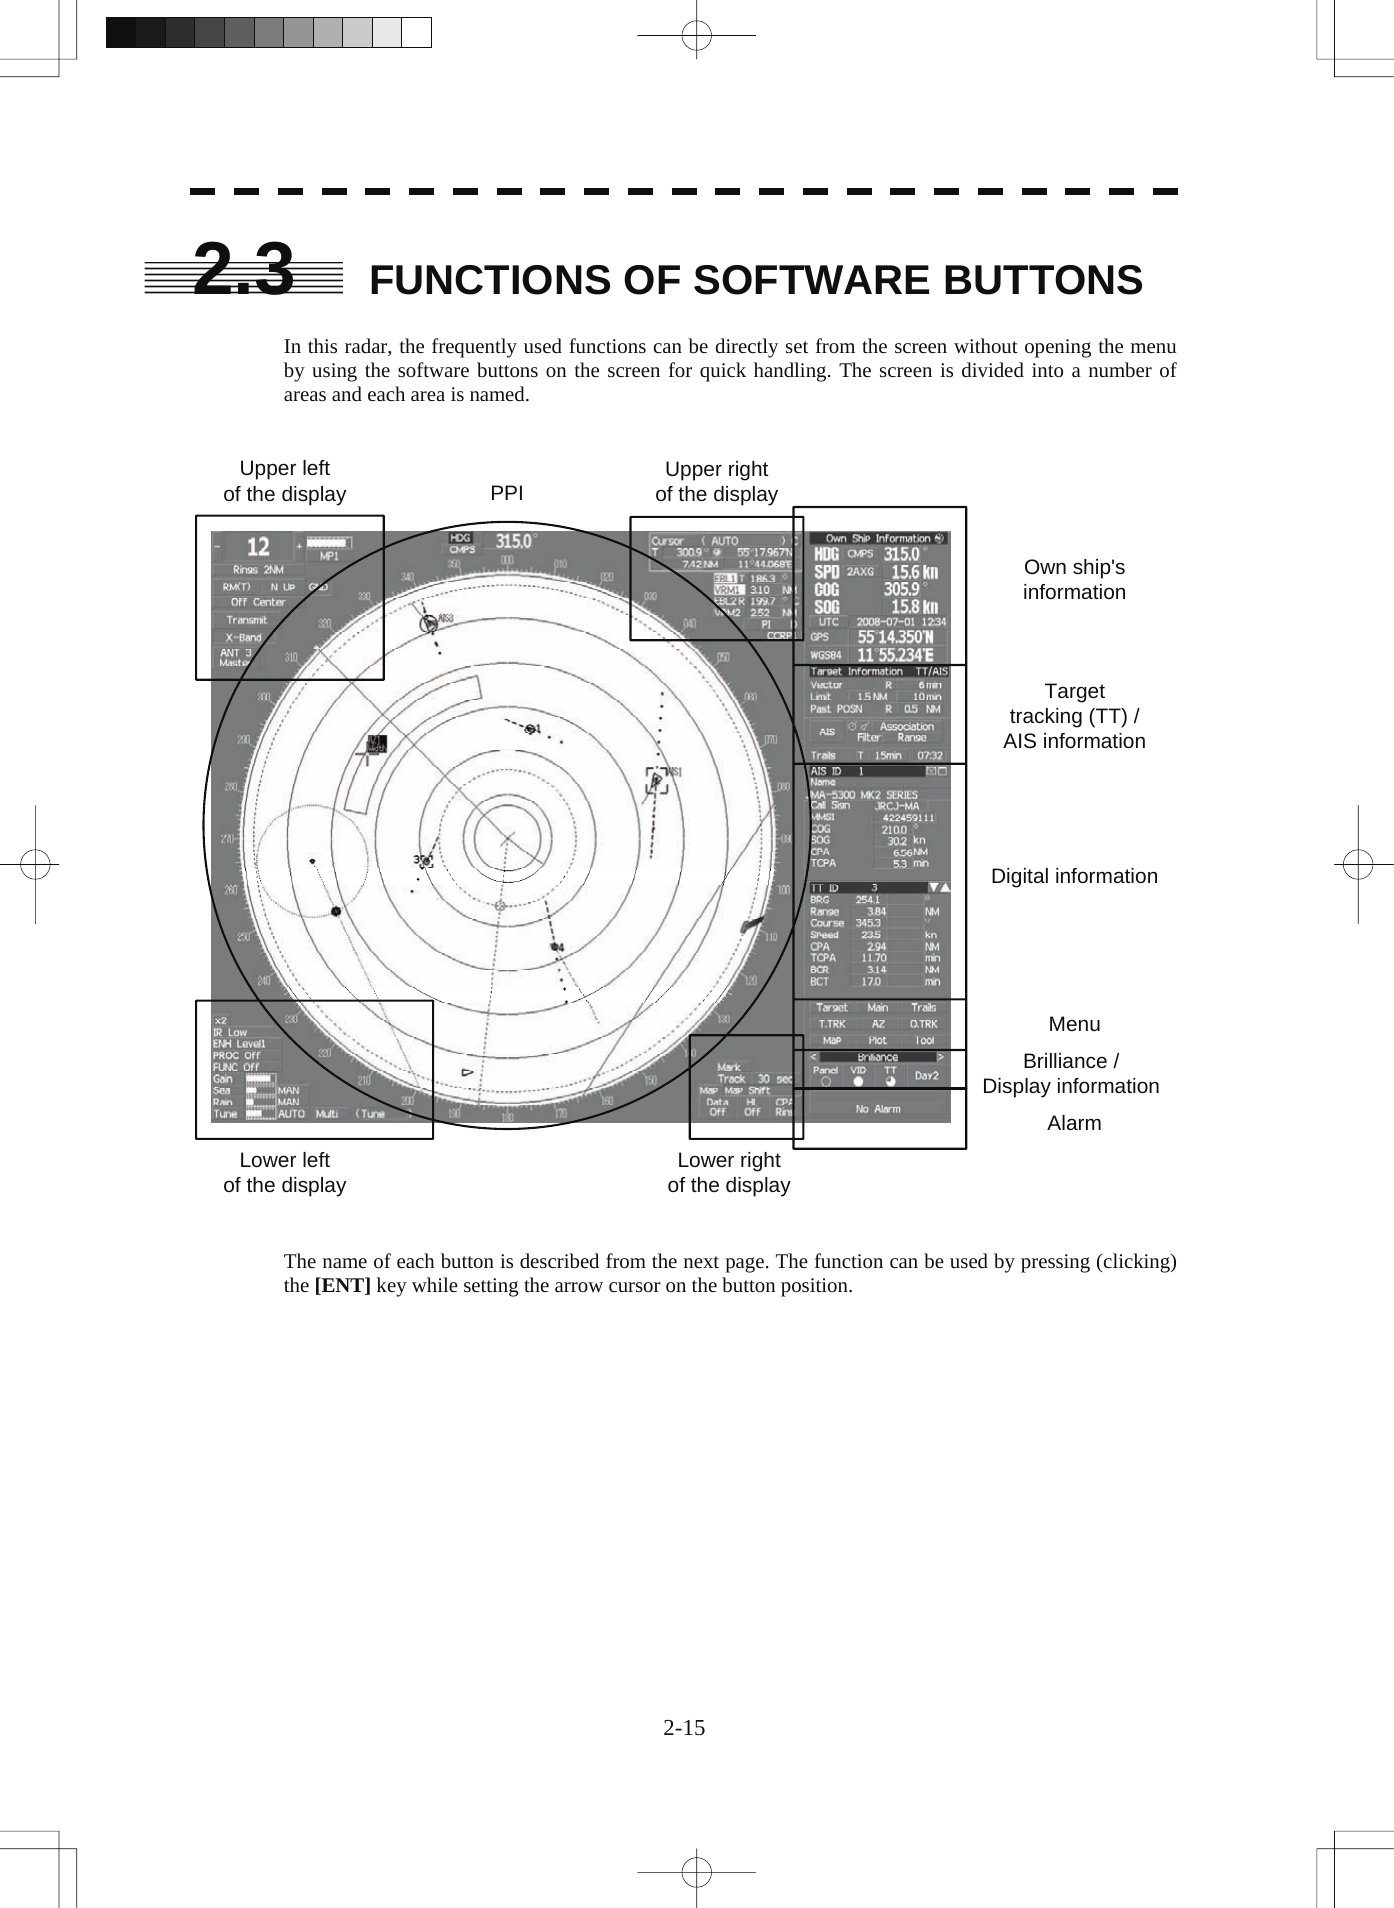  2.3  FUNCTIONS OF SOFTWARE BUTTONS  In this radar, the frequently used functions can be directly set from the screen without opening the menu by using the software buttons on the screen for quick handling. The screen is divided into a number of areas and each area is named.   PPIUpper leftof the displayLower leftof the displayUpper rightof the displayLower rightof the displayOwn ship&apos;s informationDigital informationTargettracking (TT) /AIS informationMenuBrilliance /Display informationAlarm   The name of each button is described from the next page. The function can be used by pressing (clicking) the [ENT] key while setting the arrow cursor on the button position.    2-15 